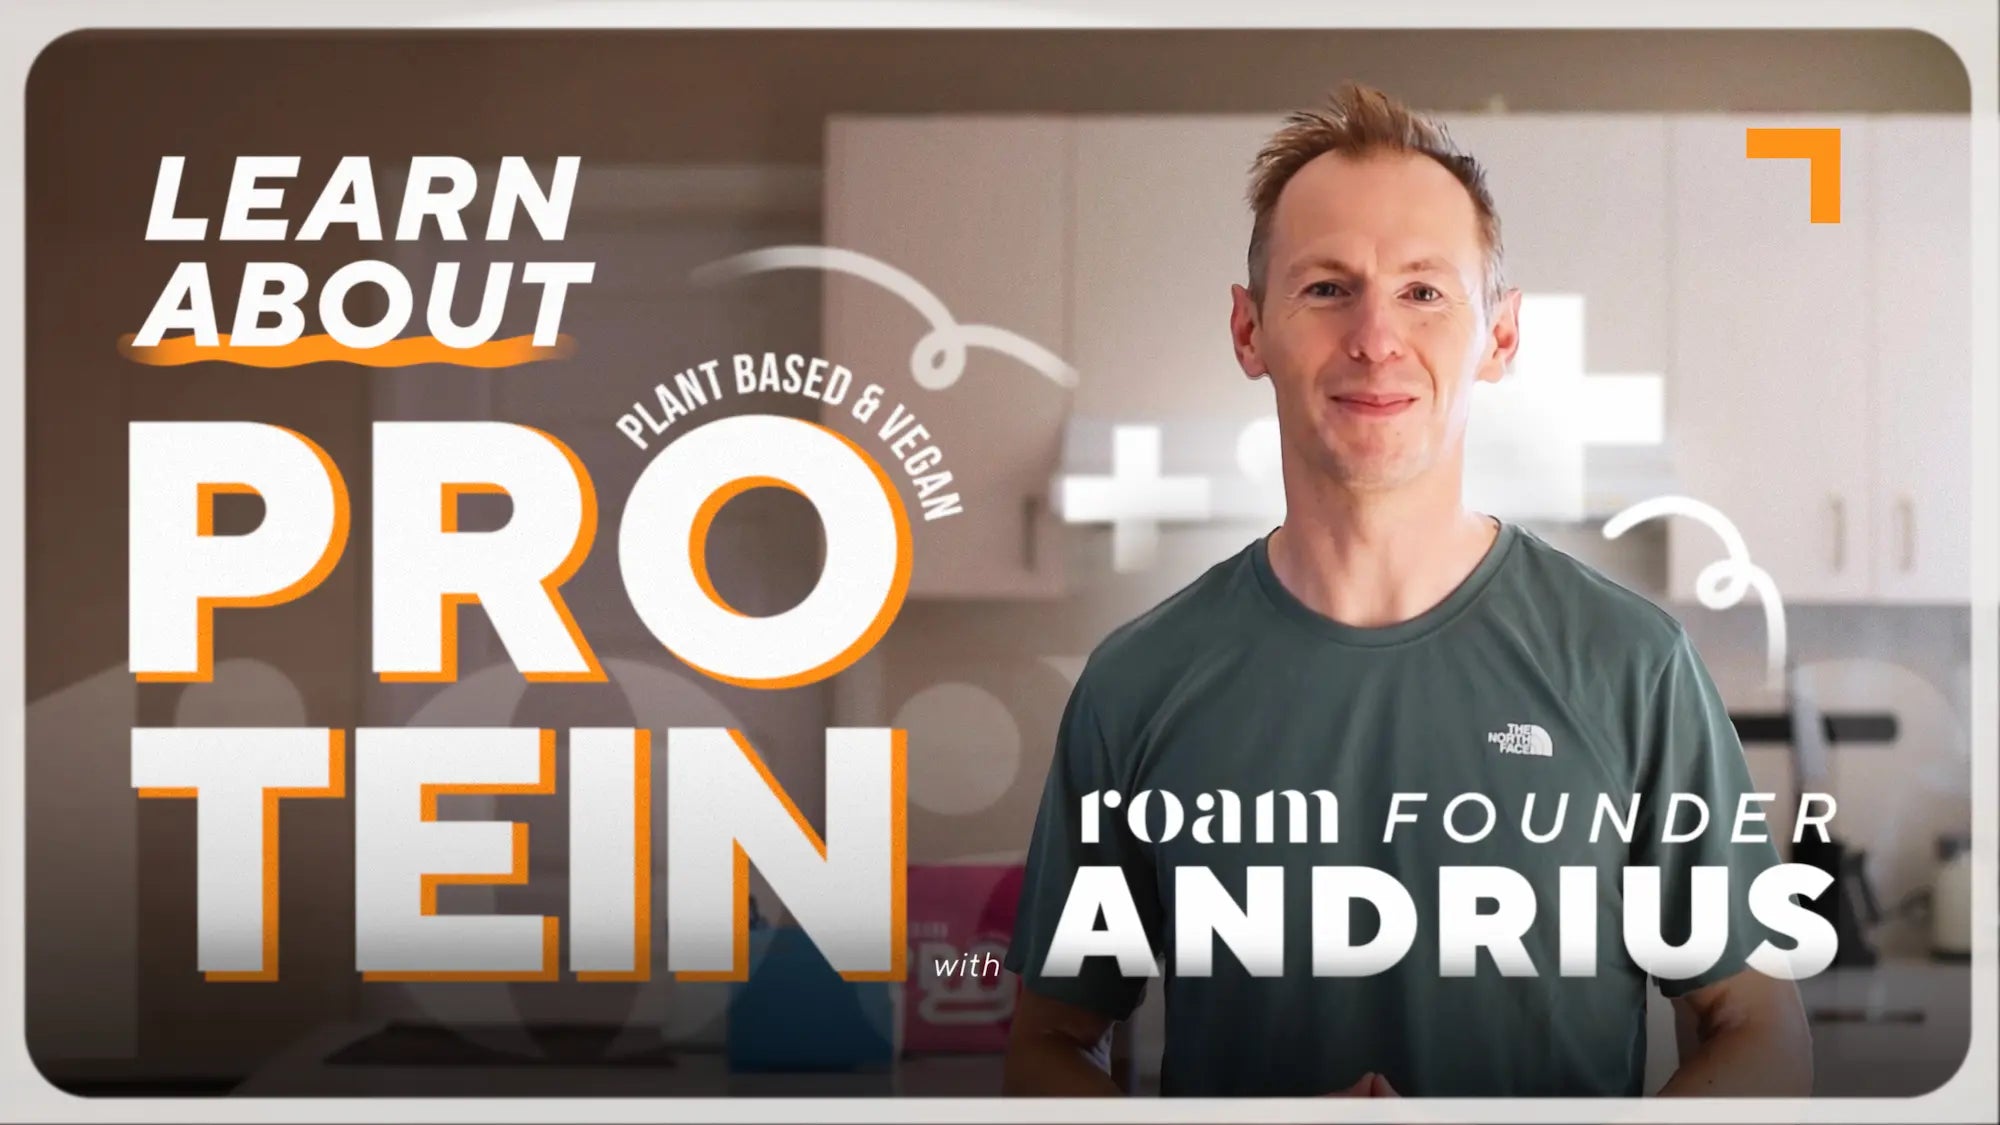 Roam Founder stands in kitchen and explains Roam Protein